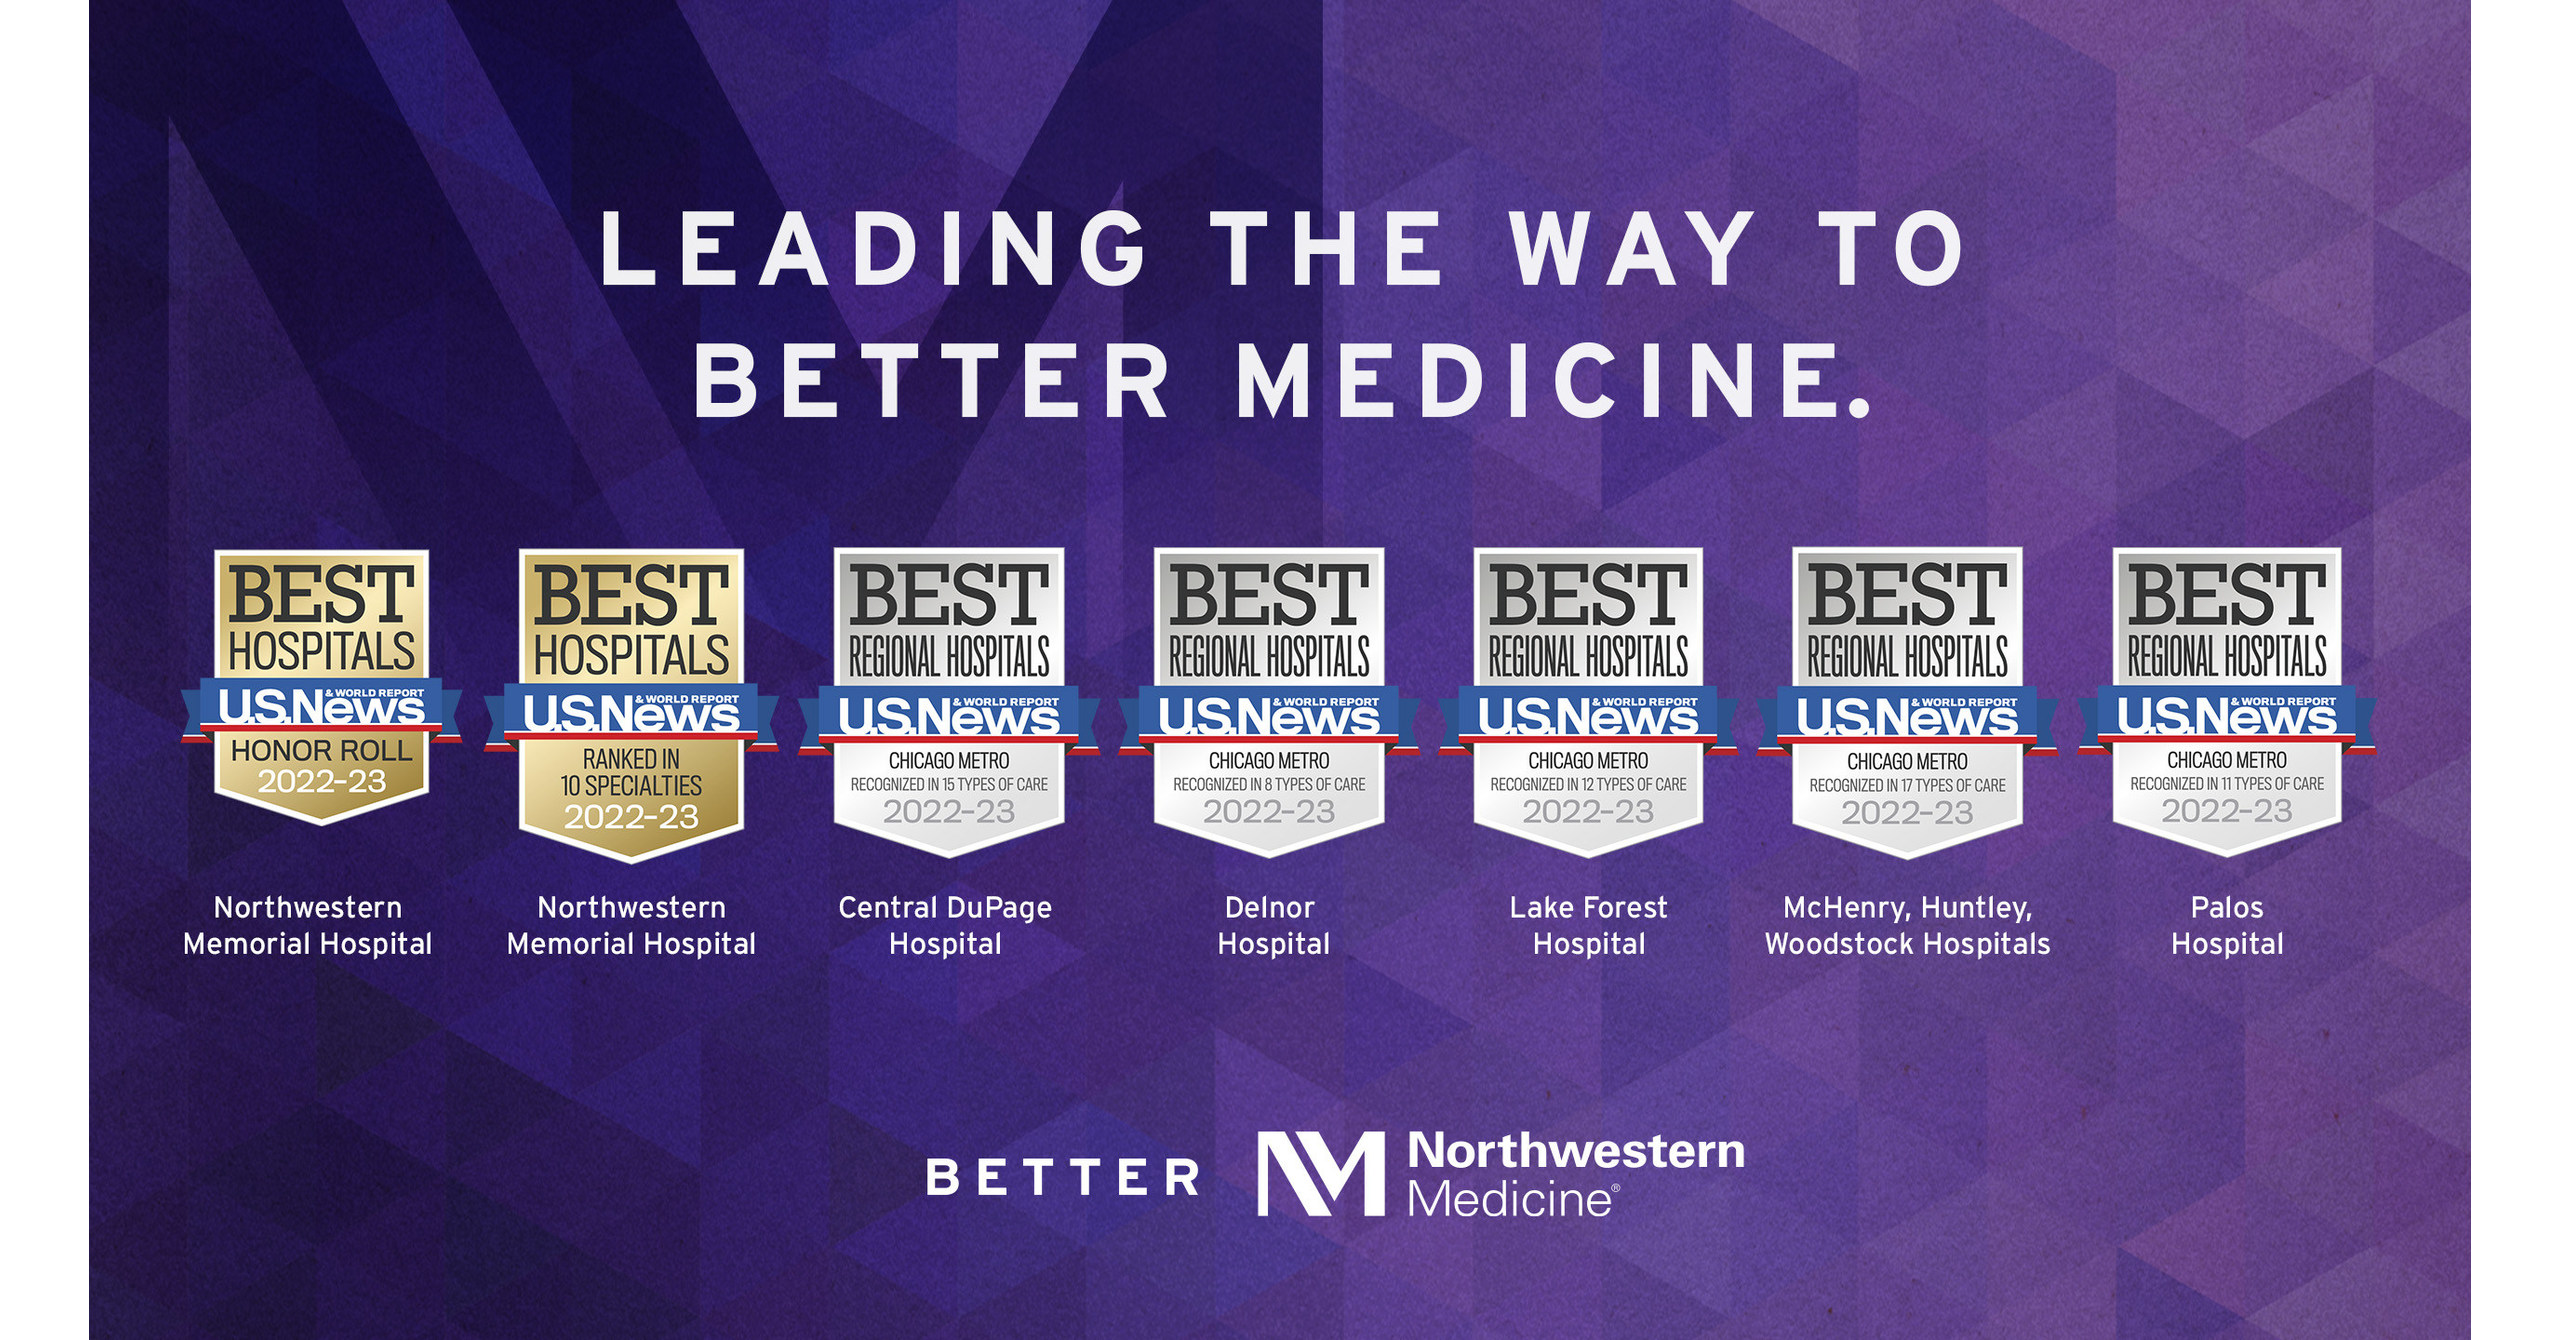 Northwestern Memorial Hospital again named top hospital in Illinois and in the top 10 in the country by U.S. News & World Report